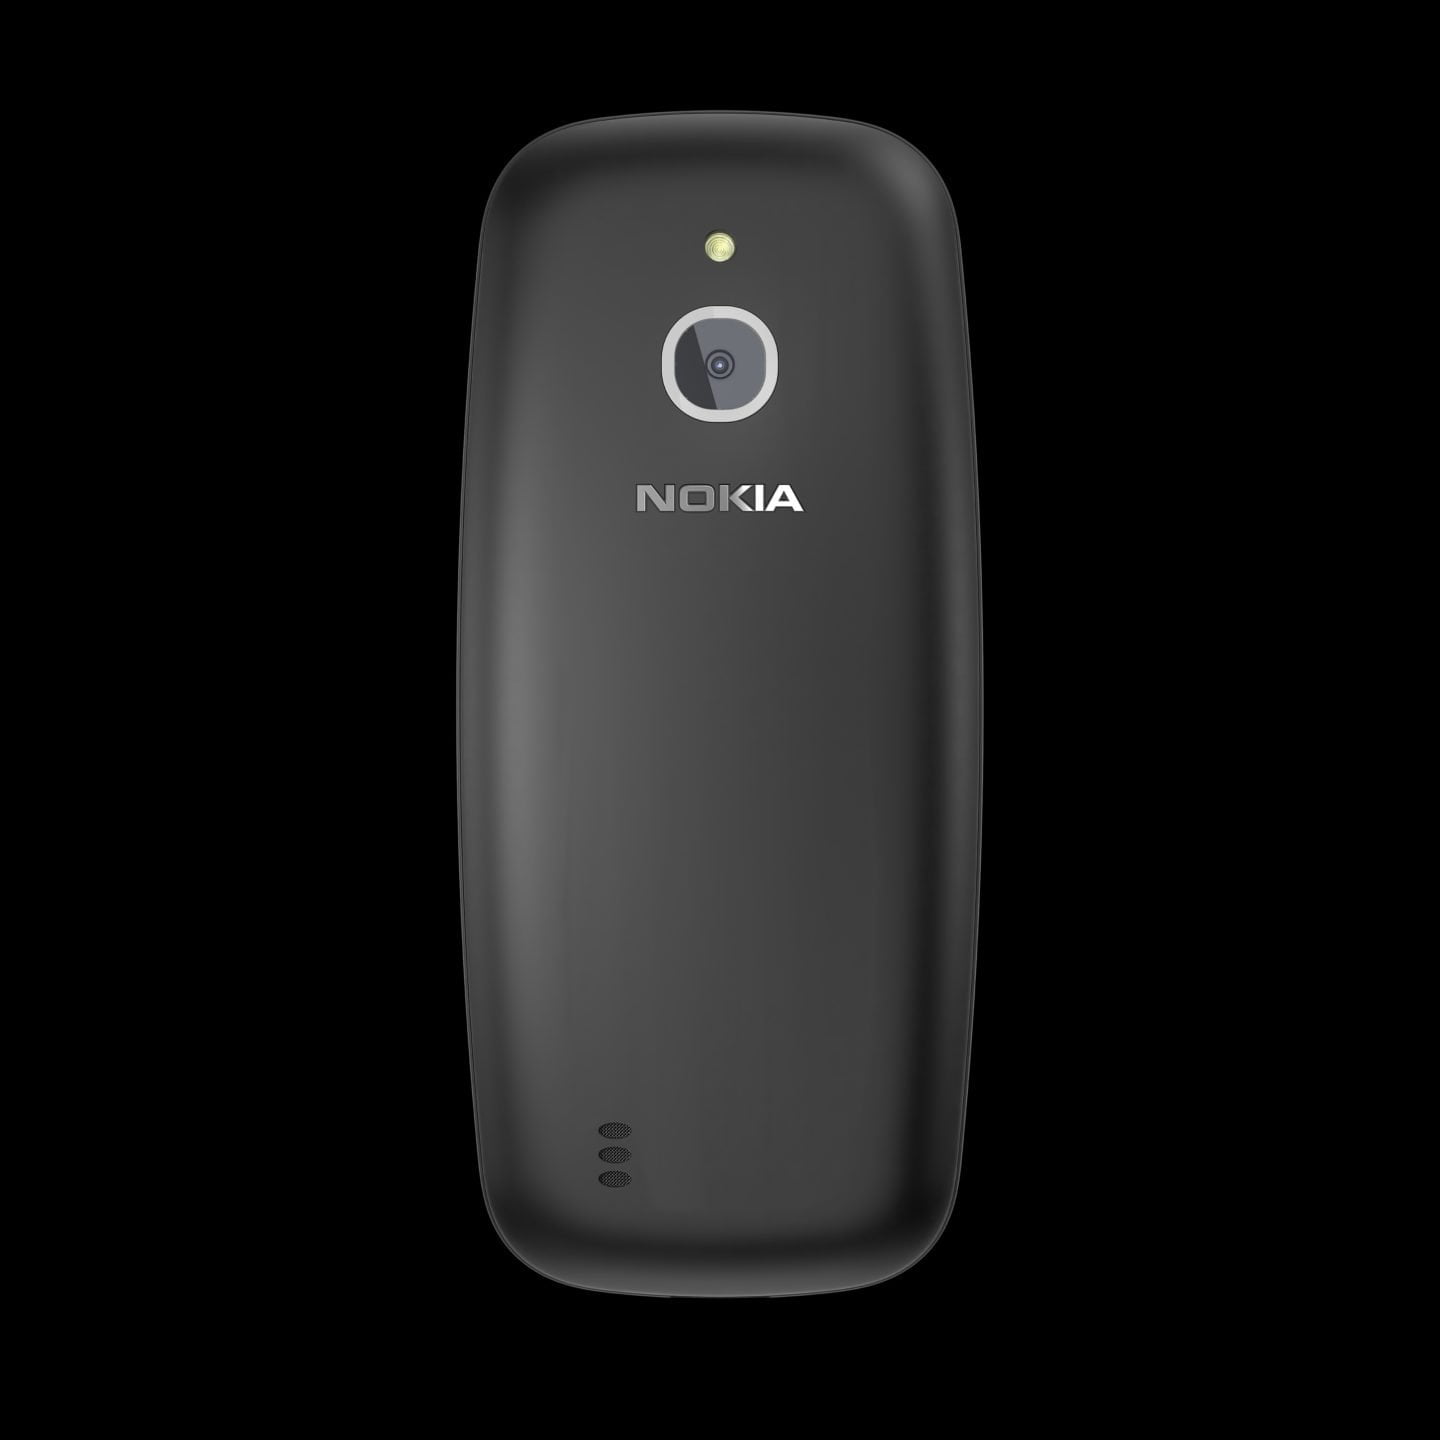 Nokia Is Hitting Canadian Market Full Force With Its New Smartphone Lineup!